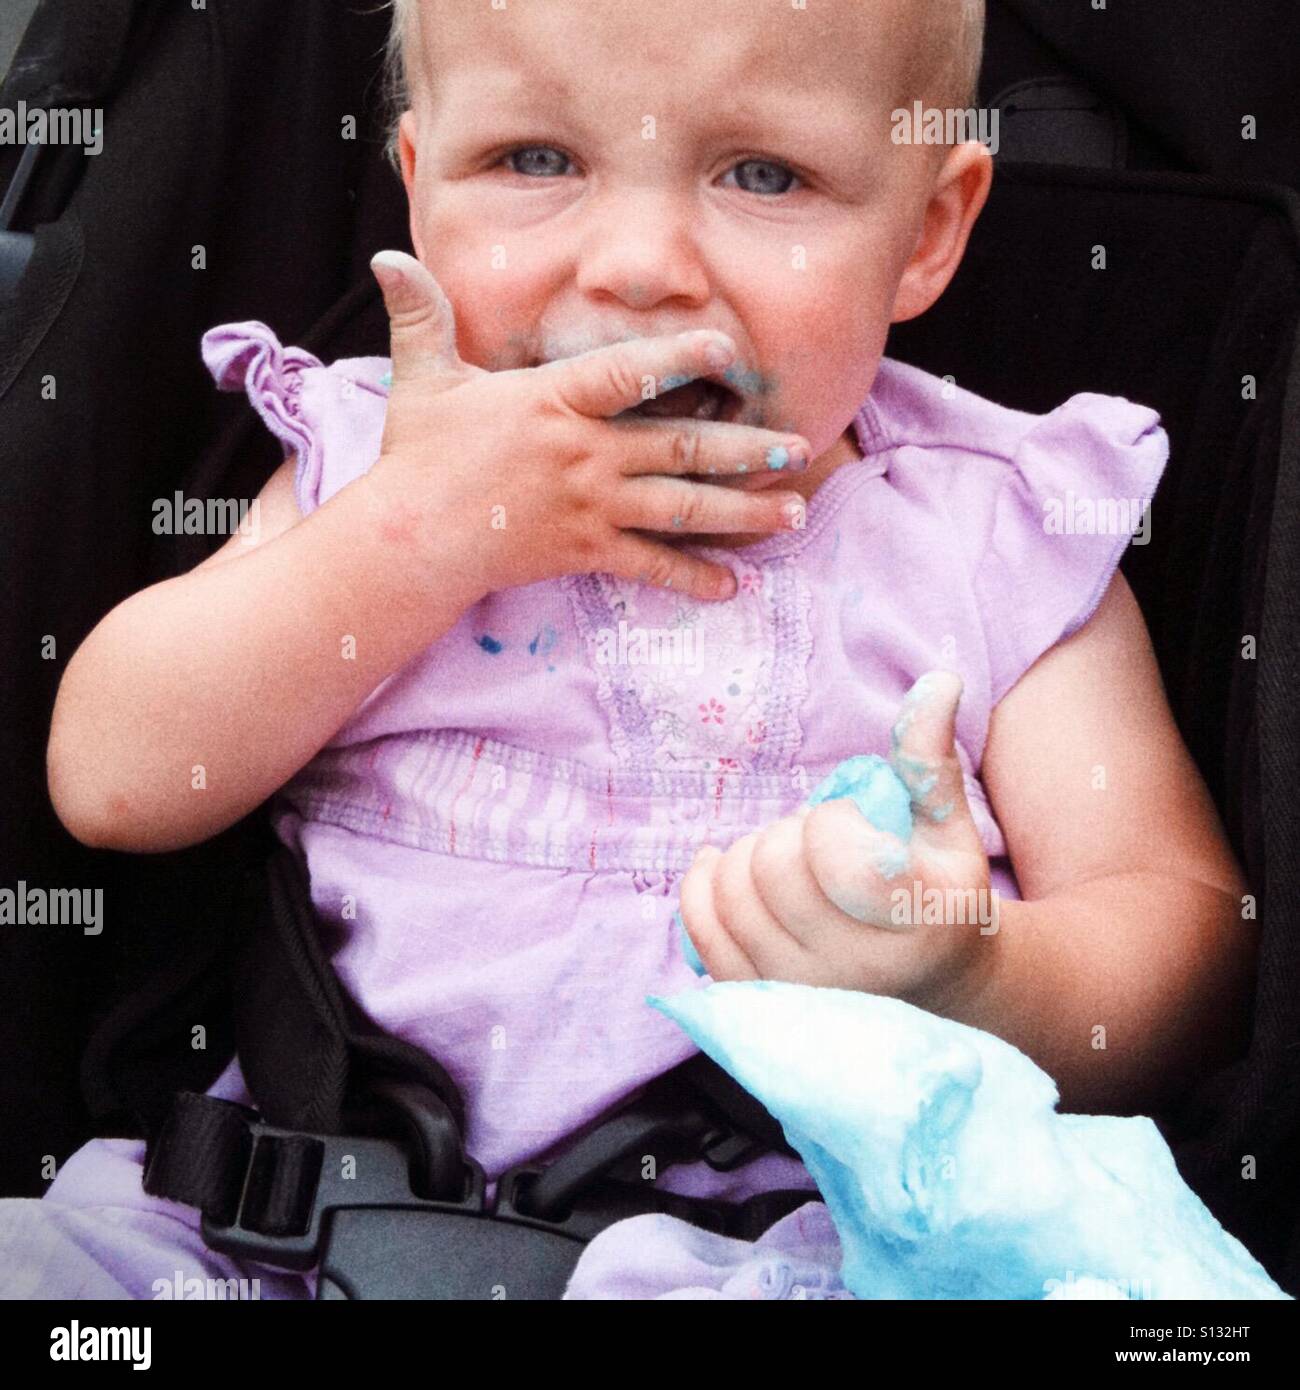 A toddler pushes blue cotton candy into her mouth. Stock Photo